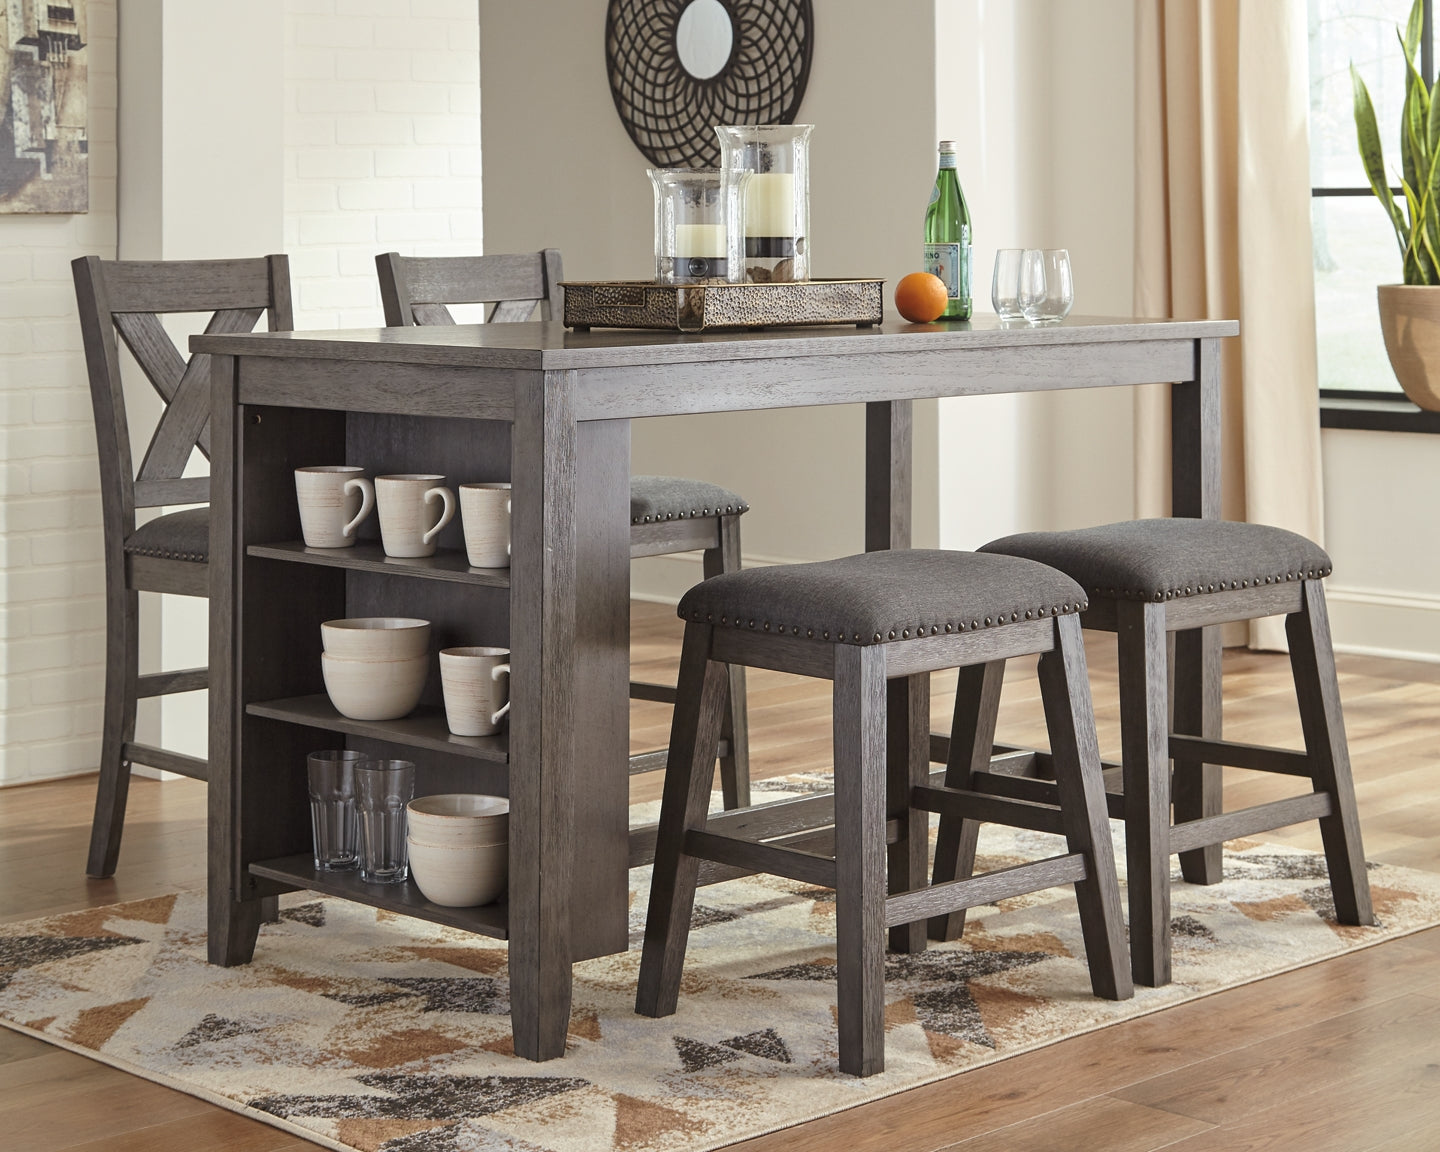 Caitbrook Counter Height Dining Table and 4 Barstools Wilson Furniture (OH)  in Bridgeport, Ohio. Serving Bridgeport, Yorkville, Bellaire, & Avondale